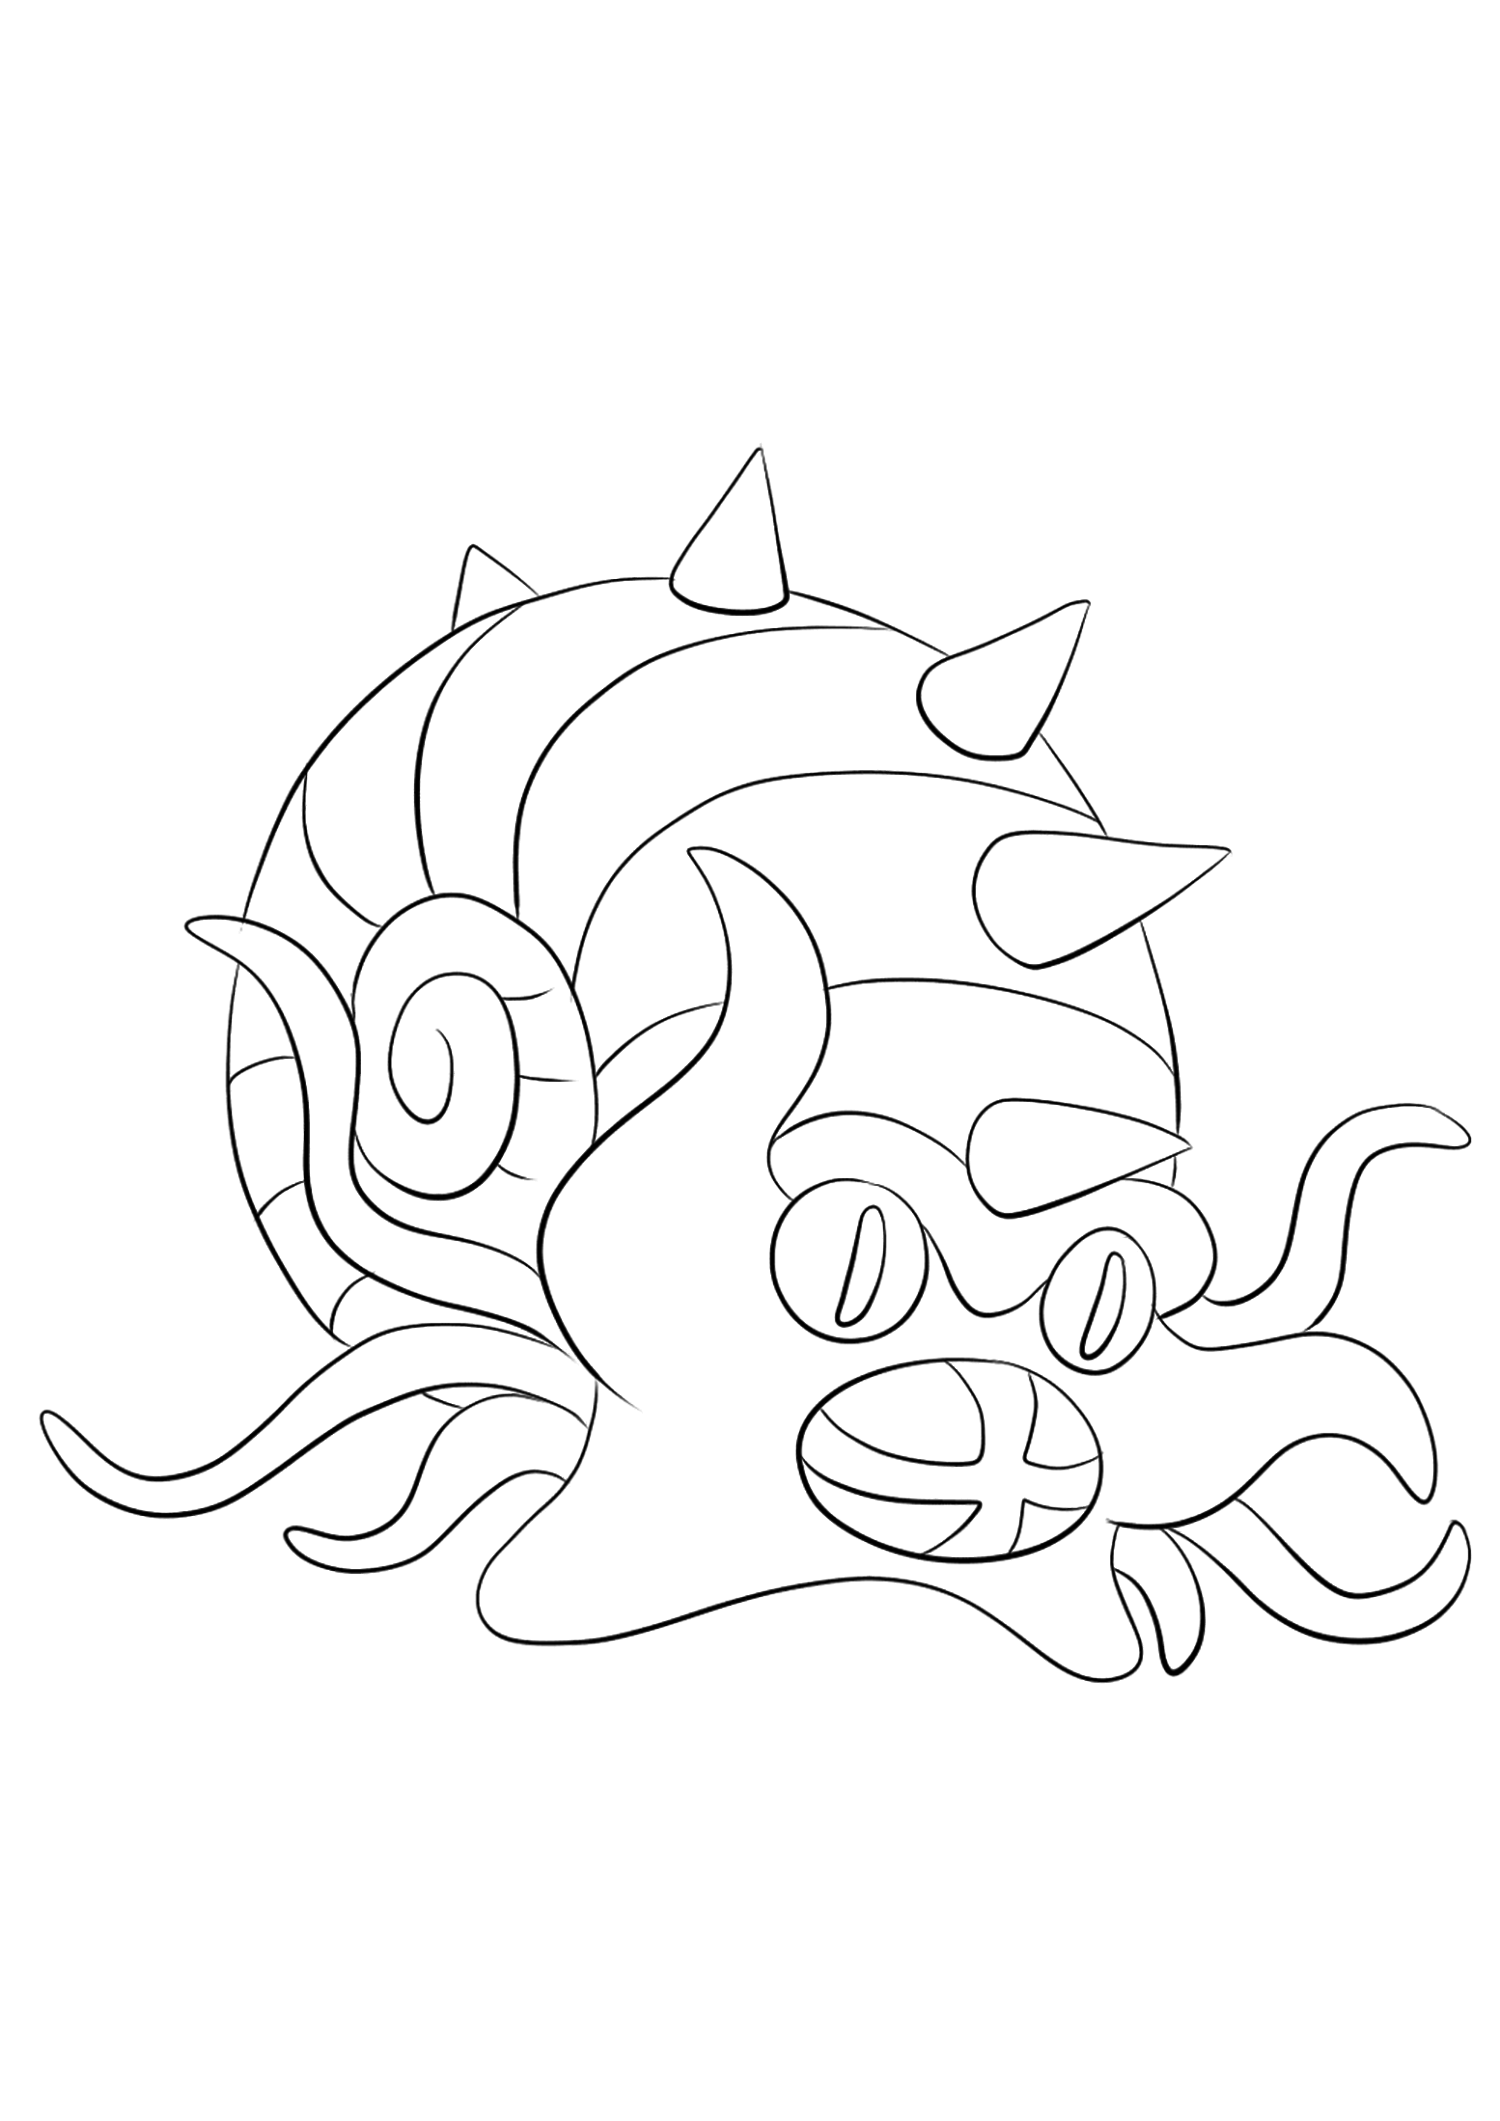 Omastar (No.139). Omastar Coloring page, Generation I Pokemon of type Rock and WaterOriginal image credit: Pokemon linearts by Lilly Gerbil on Deviantart.Permission:  All rights reserved © Pokemon company and Ken Sugimori.